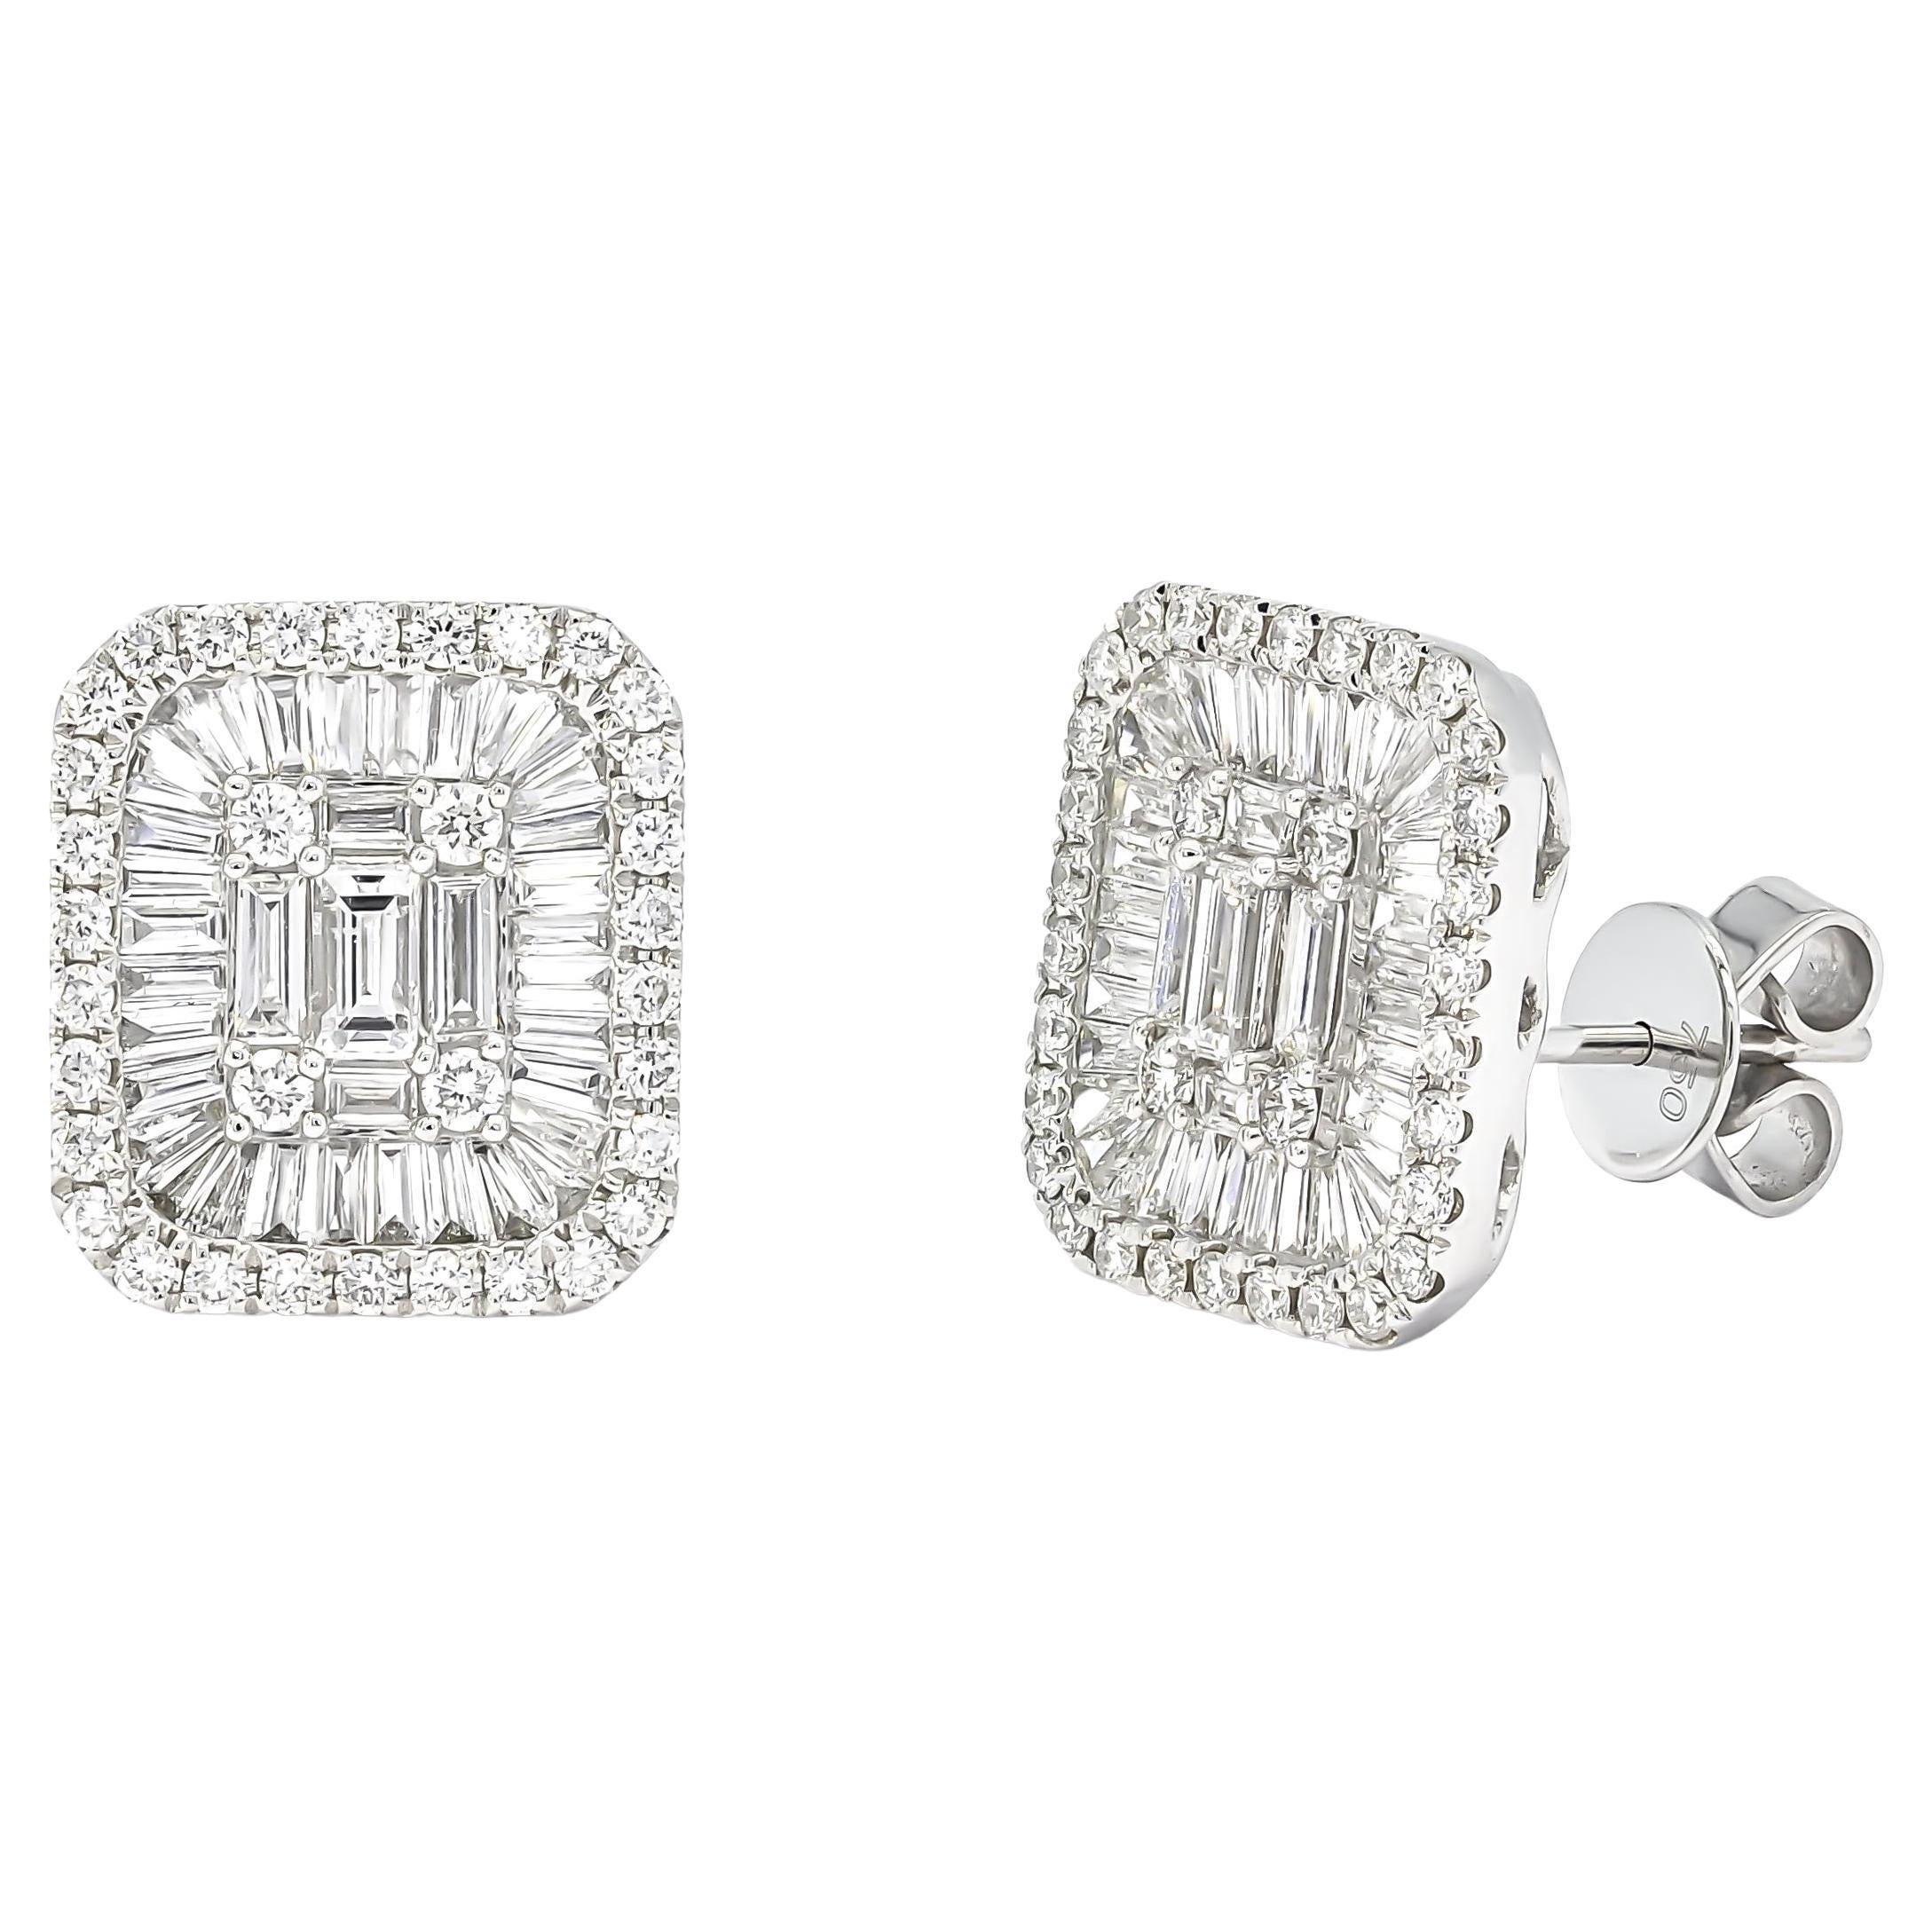  Natural Diamonds 1.80 CTS 18 Karat White Gold  Halo Cluster Stud Earrings For Sale